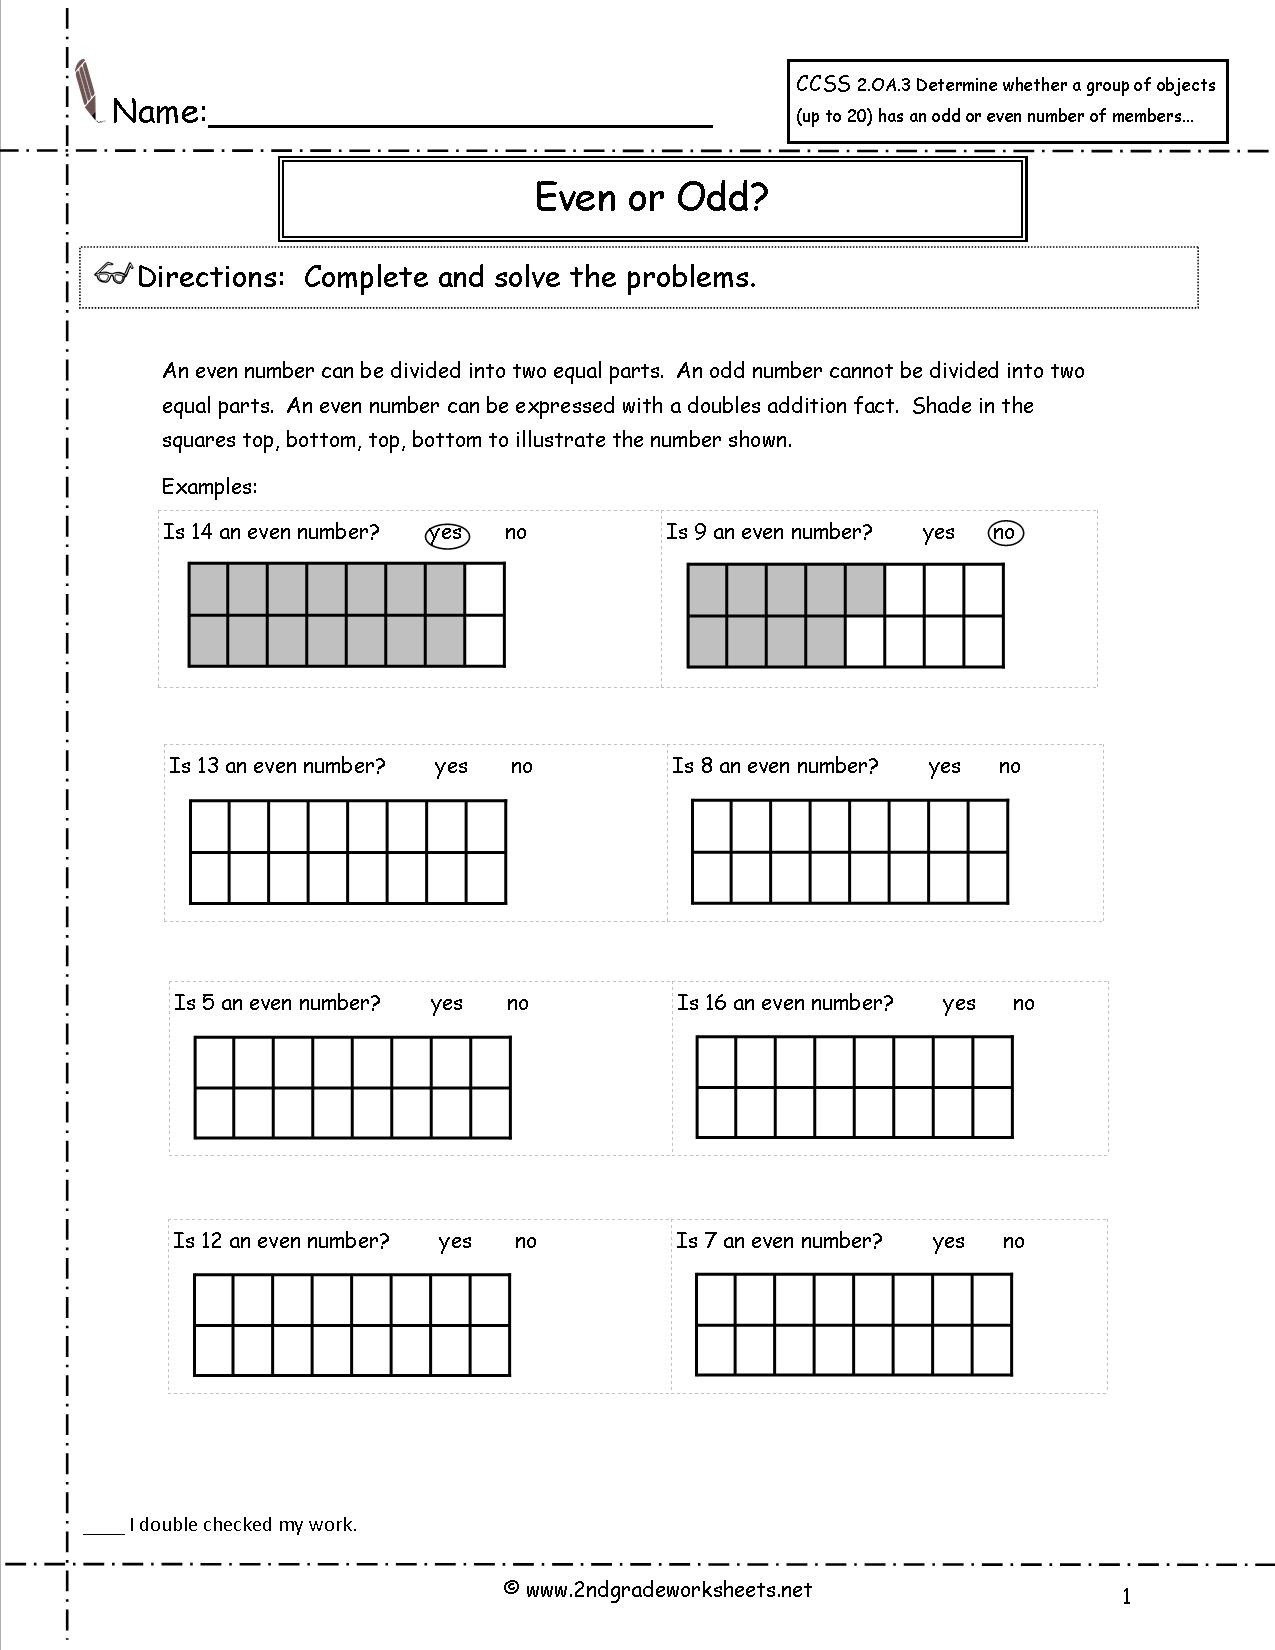 8th-grade-math-worksheets-common-core-db-excel